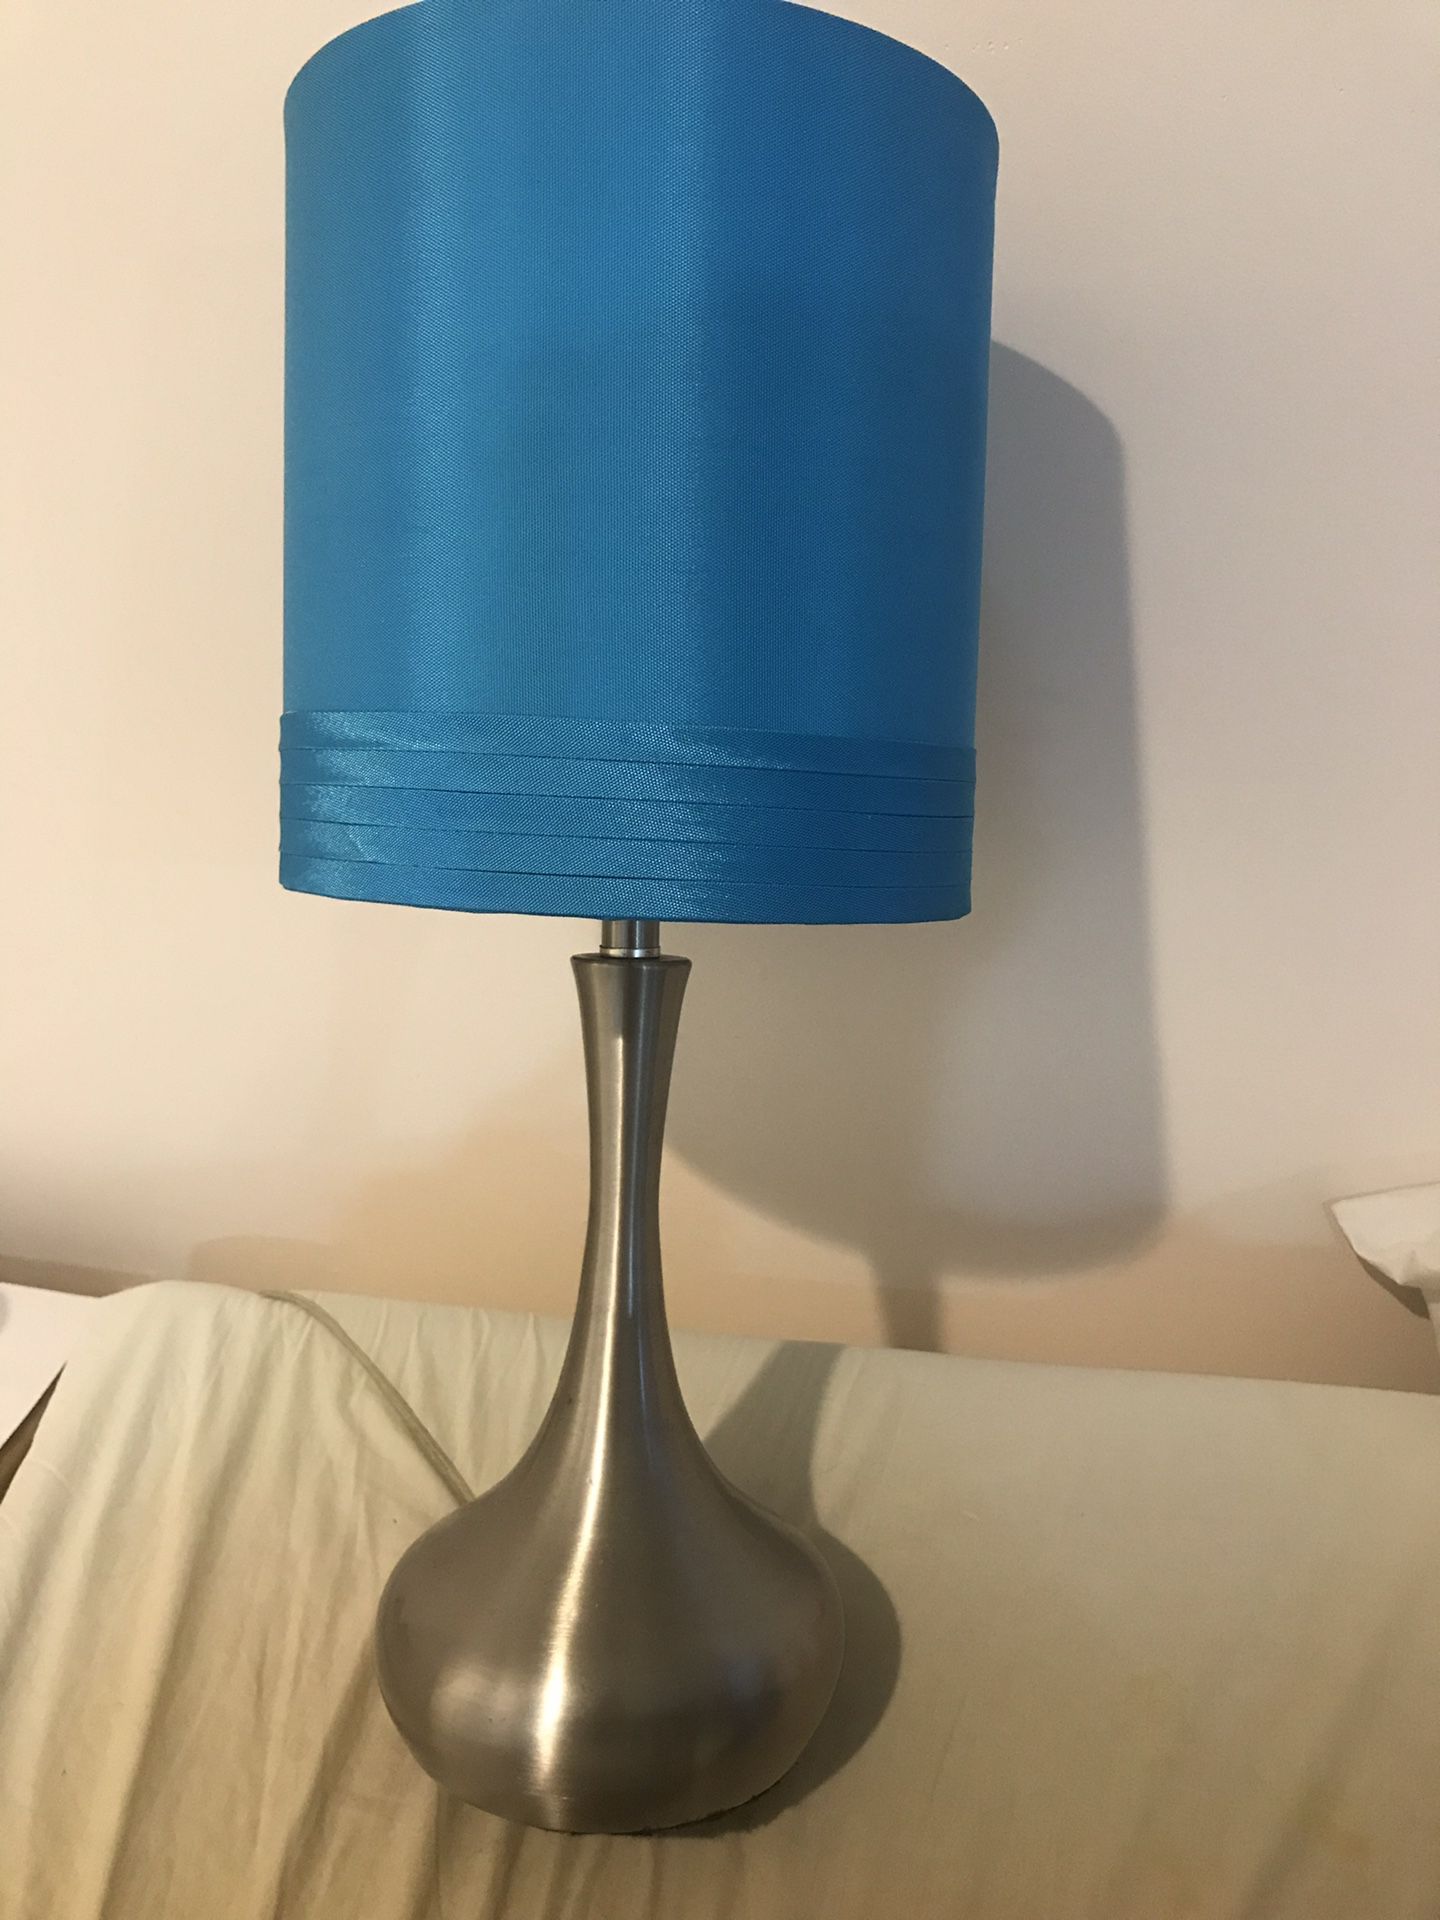 Set of 2 Blue Shade Silver Lamps - Perfect Bedside